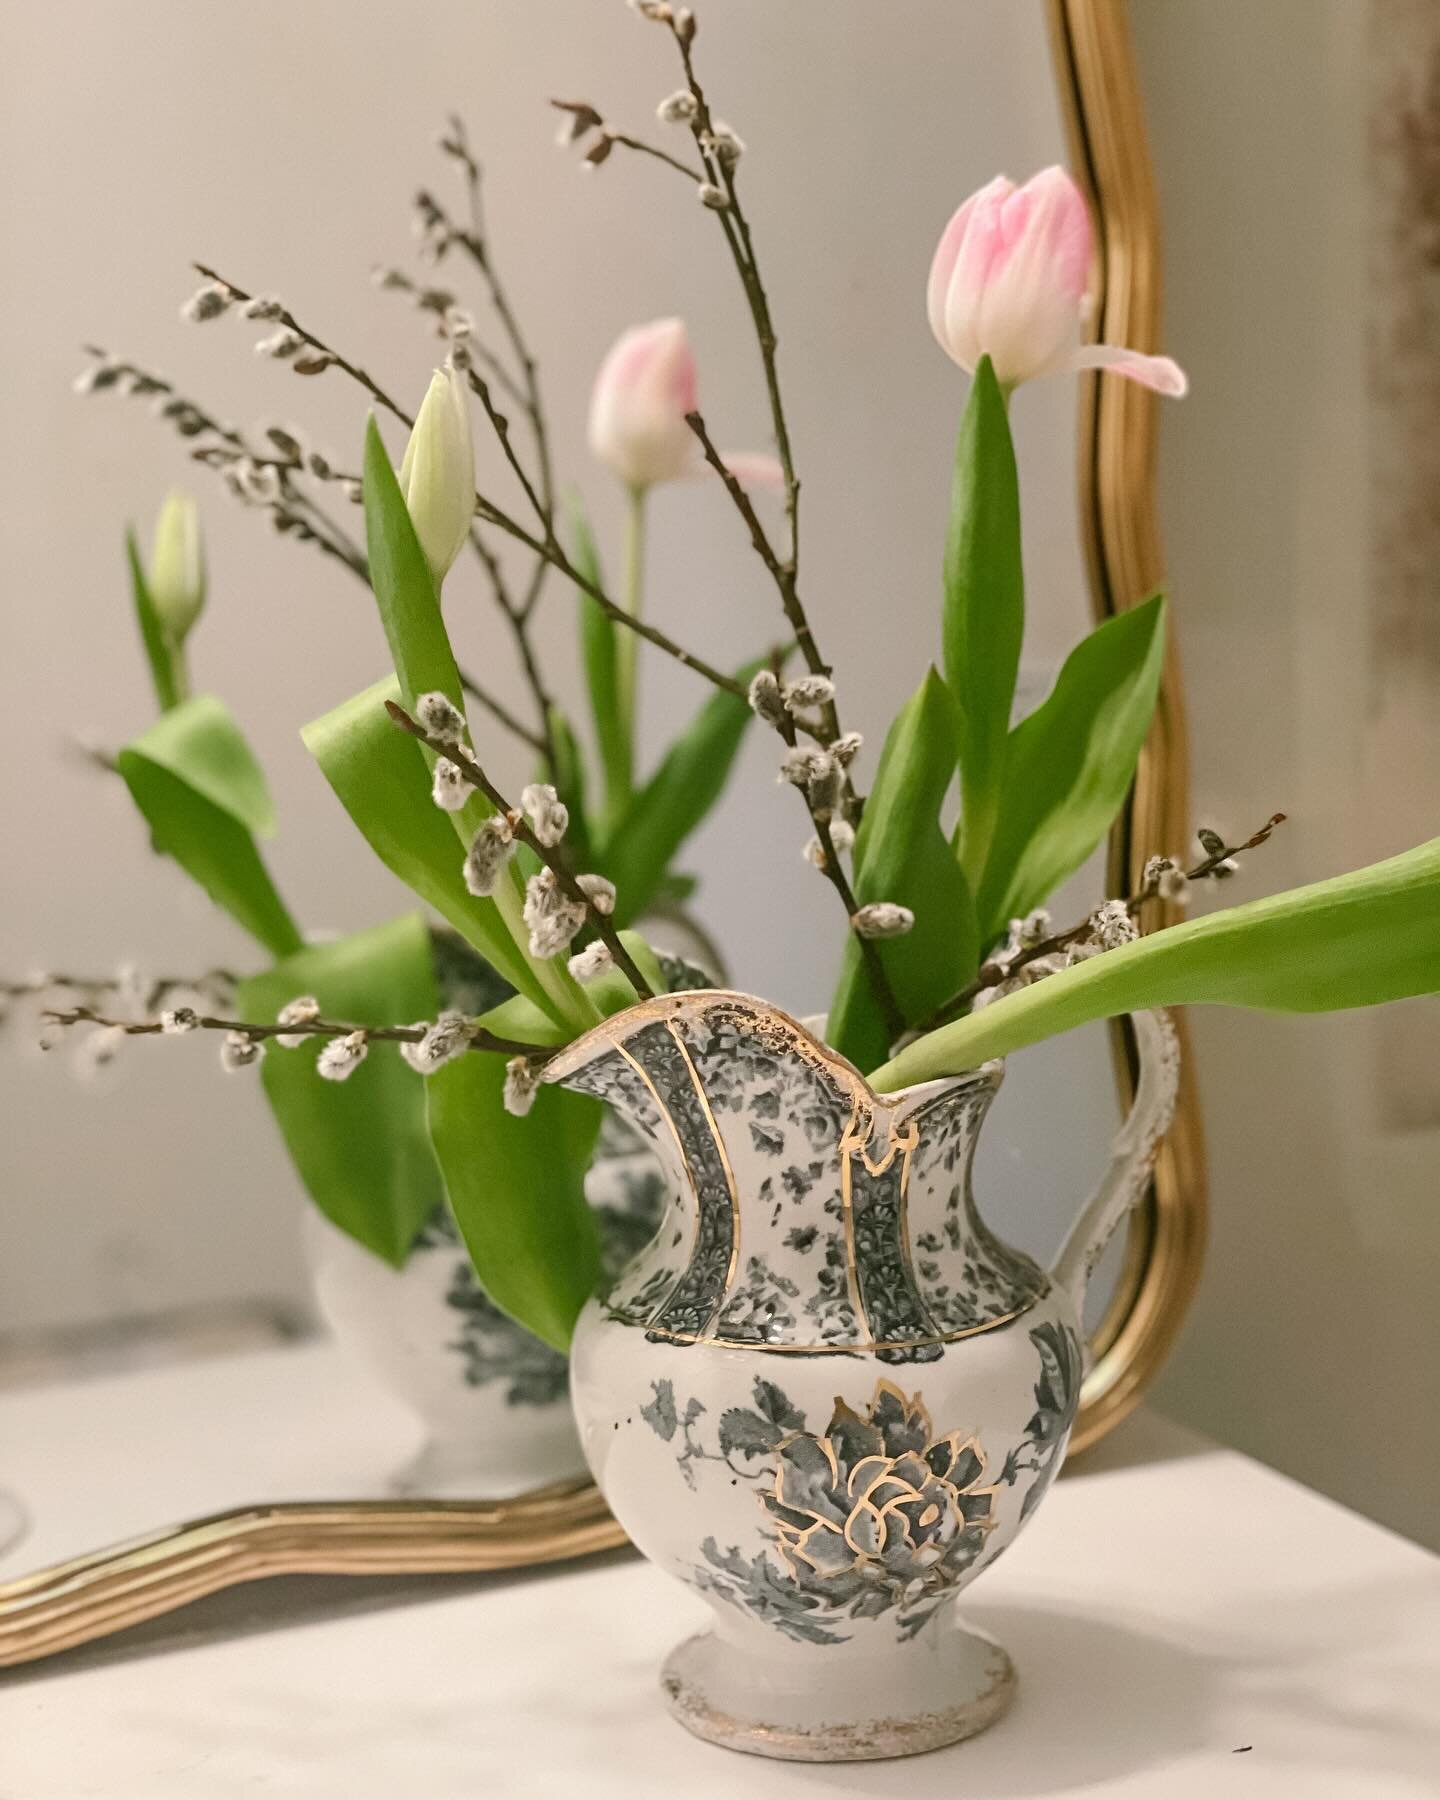 This charming little blue jug truly is a testament to the fact that inspiration can strike from the most unexpected places. Just like how its delicate floral pattern and touch of gold set the stage for my bathroom&rsquo;s mini makeover, incorporating